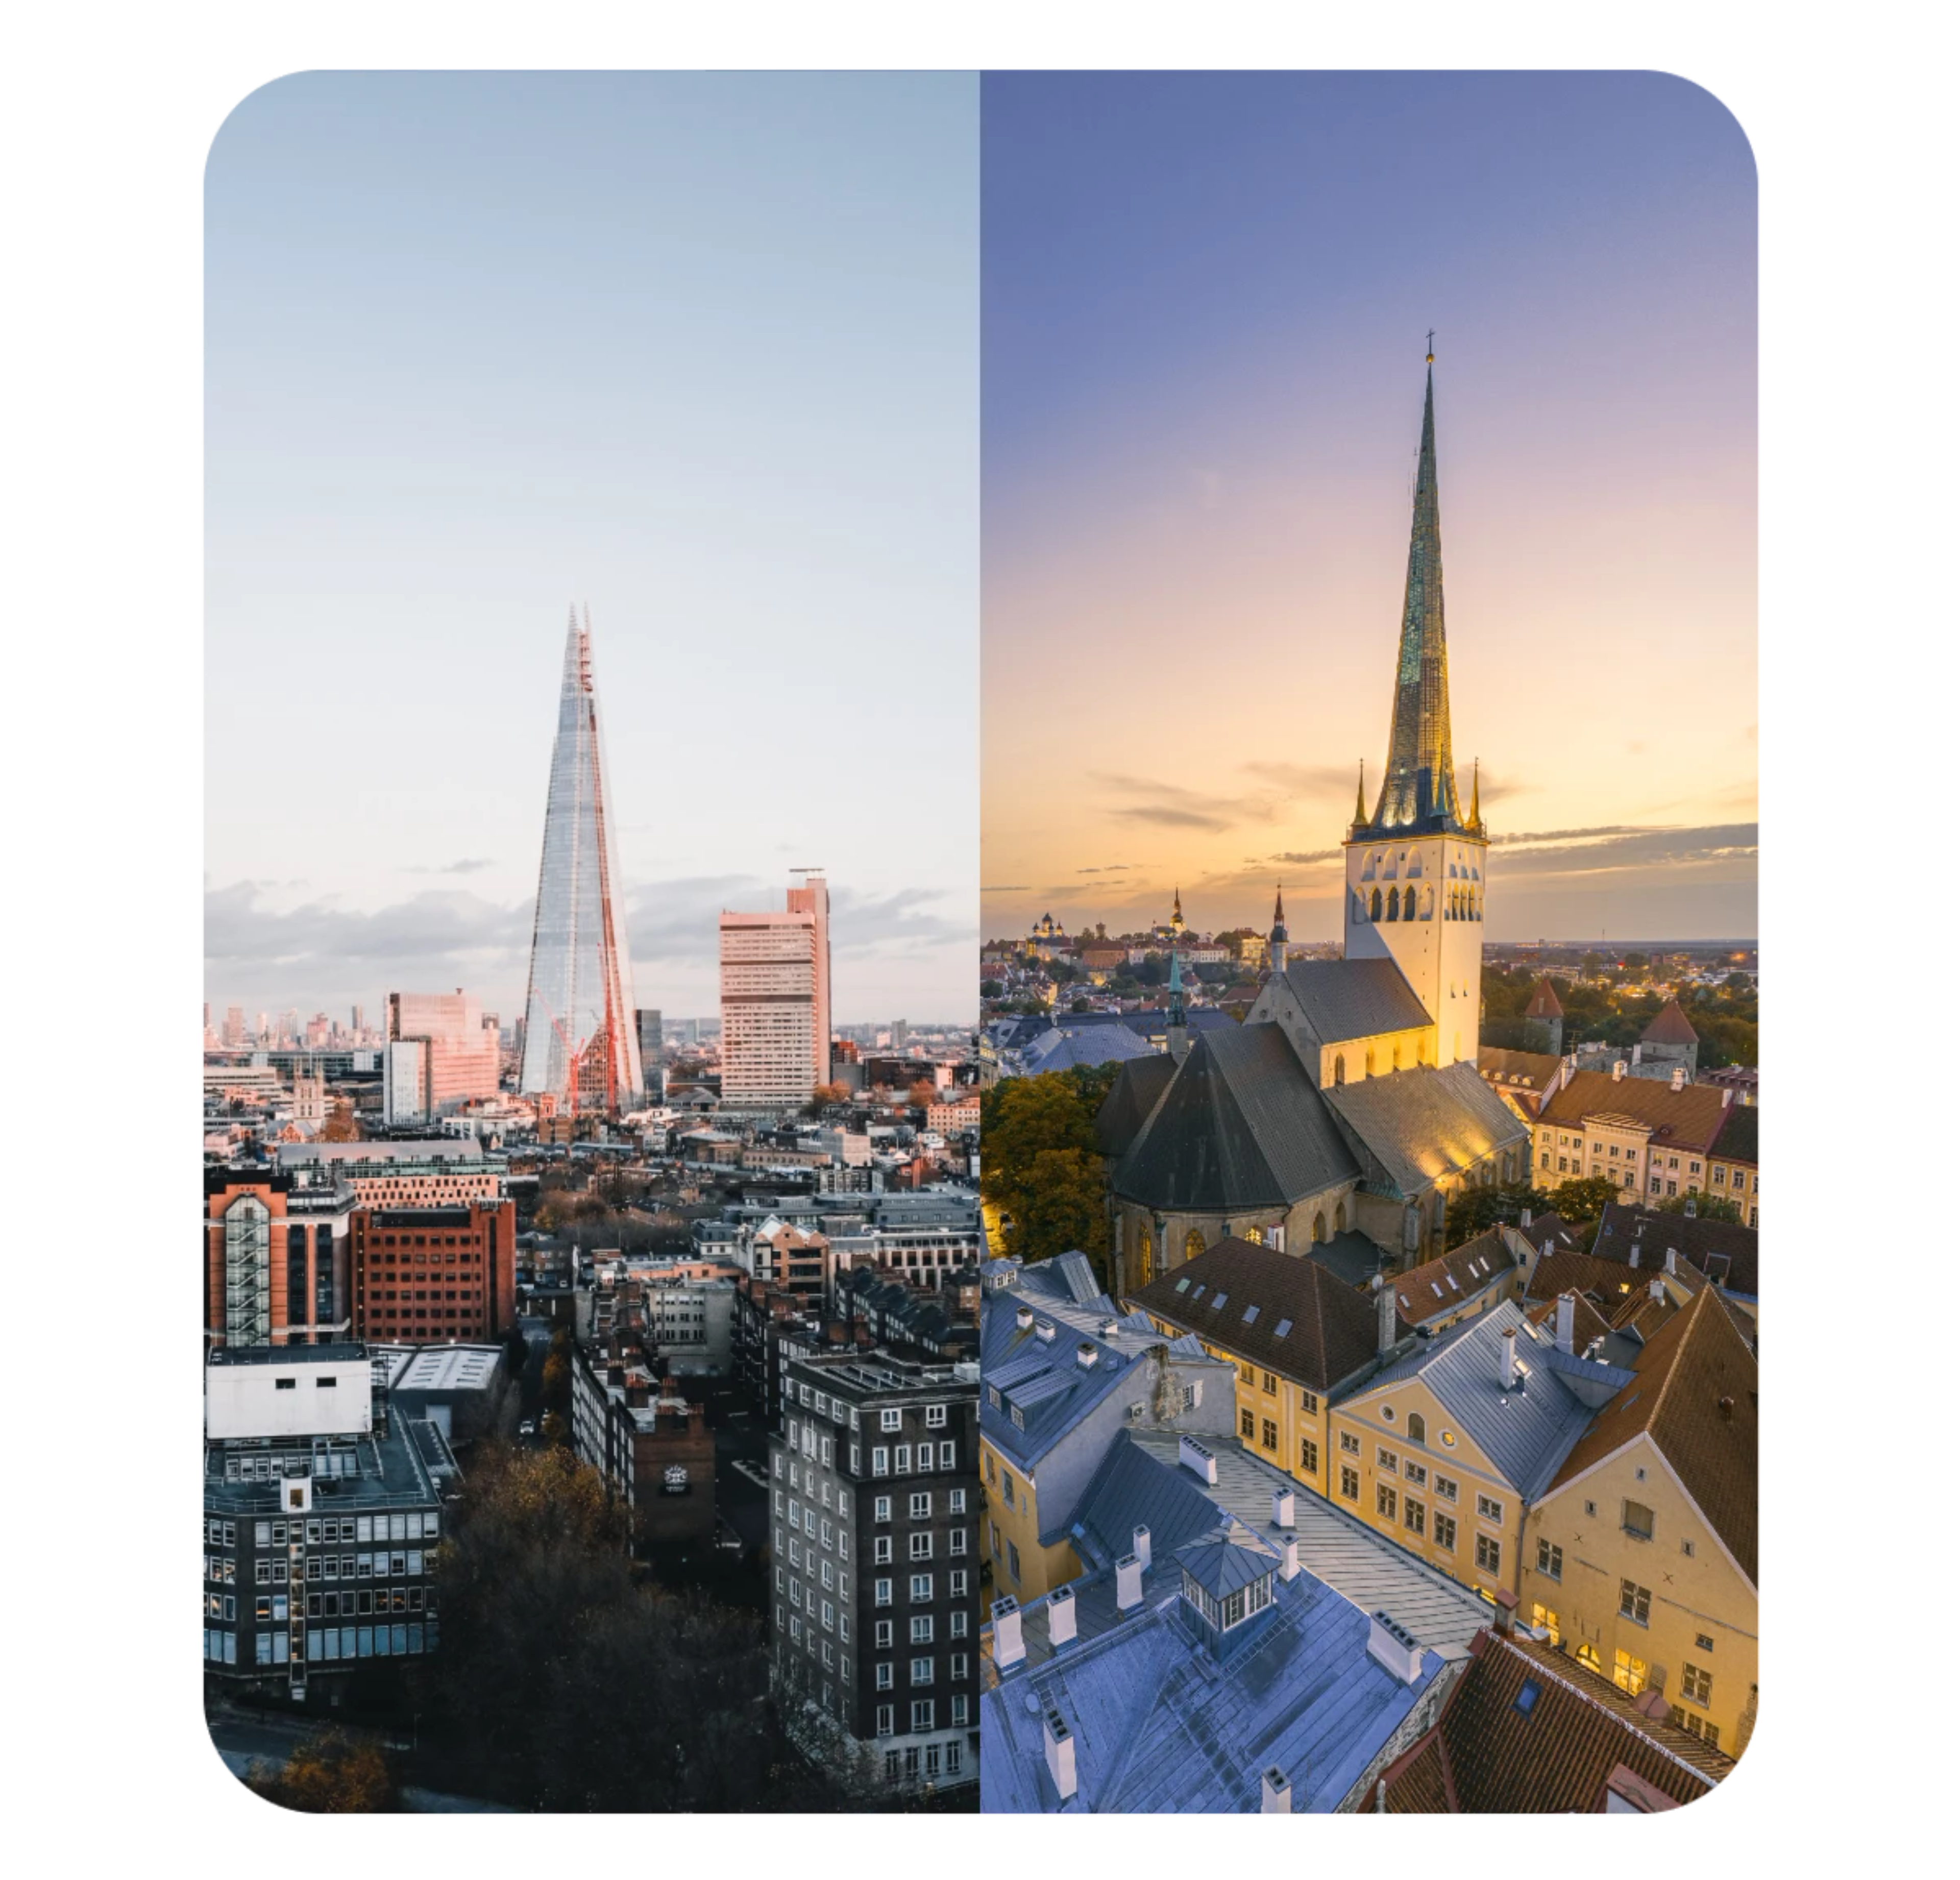 A split image contrasting two cityscapes during twilight. On the left, London with the Shard skyscraper dominating the skyline, amidst a cluster of buildings. On the right, Tallinn with traditional architecture, featuring a tall, slender spire of a Gothic church rising above historic, colourful buildings. Both sides capture the cities' unique character as daylight fades.